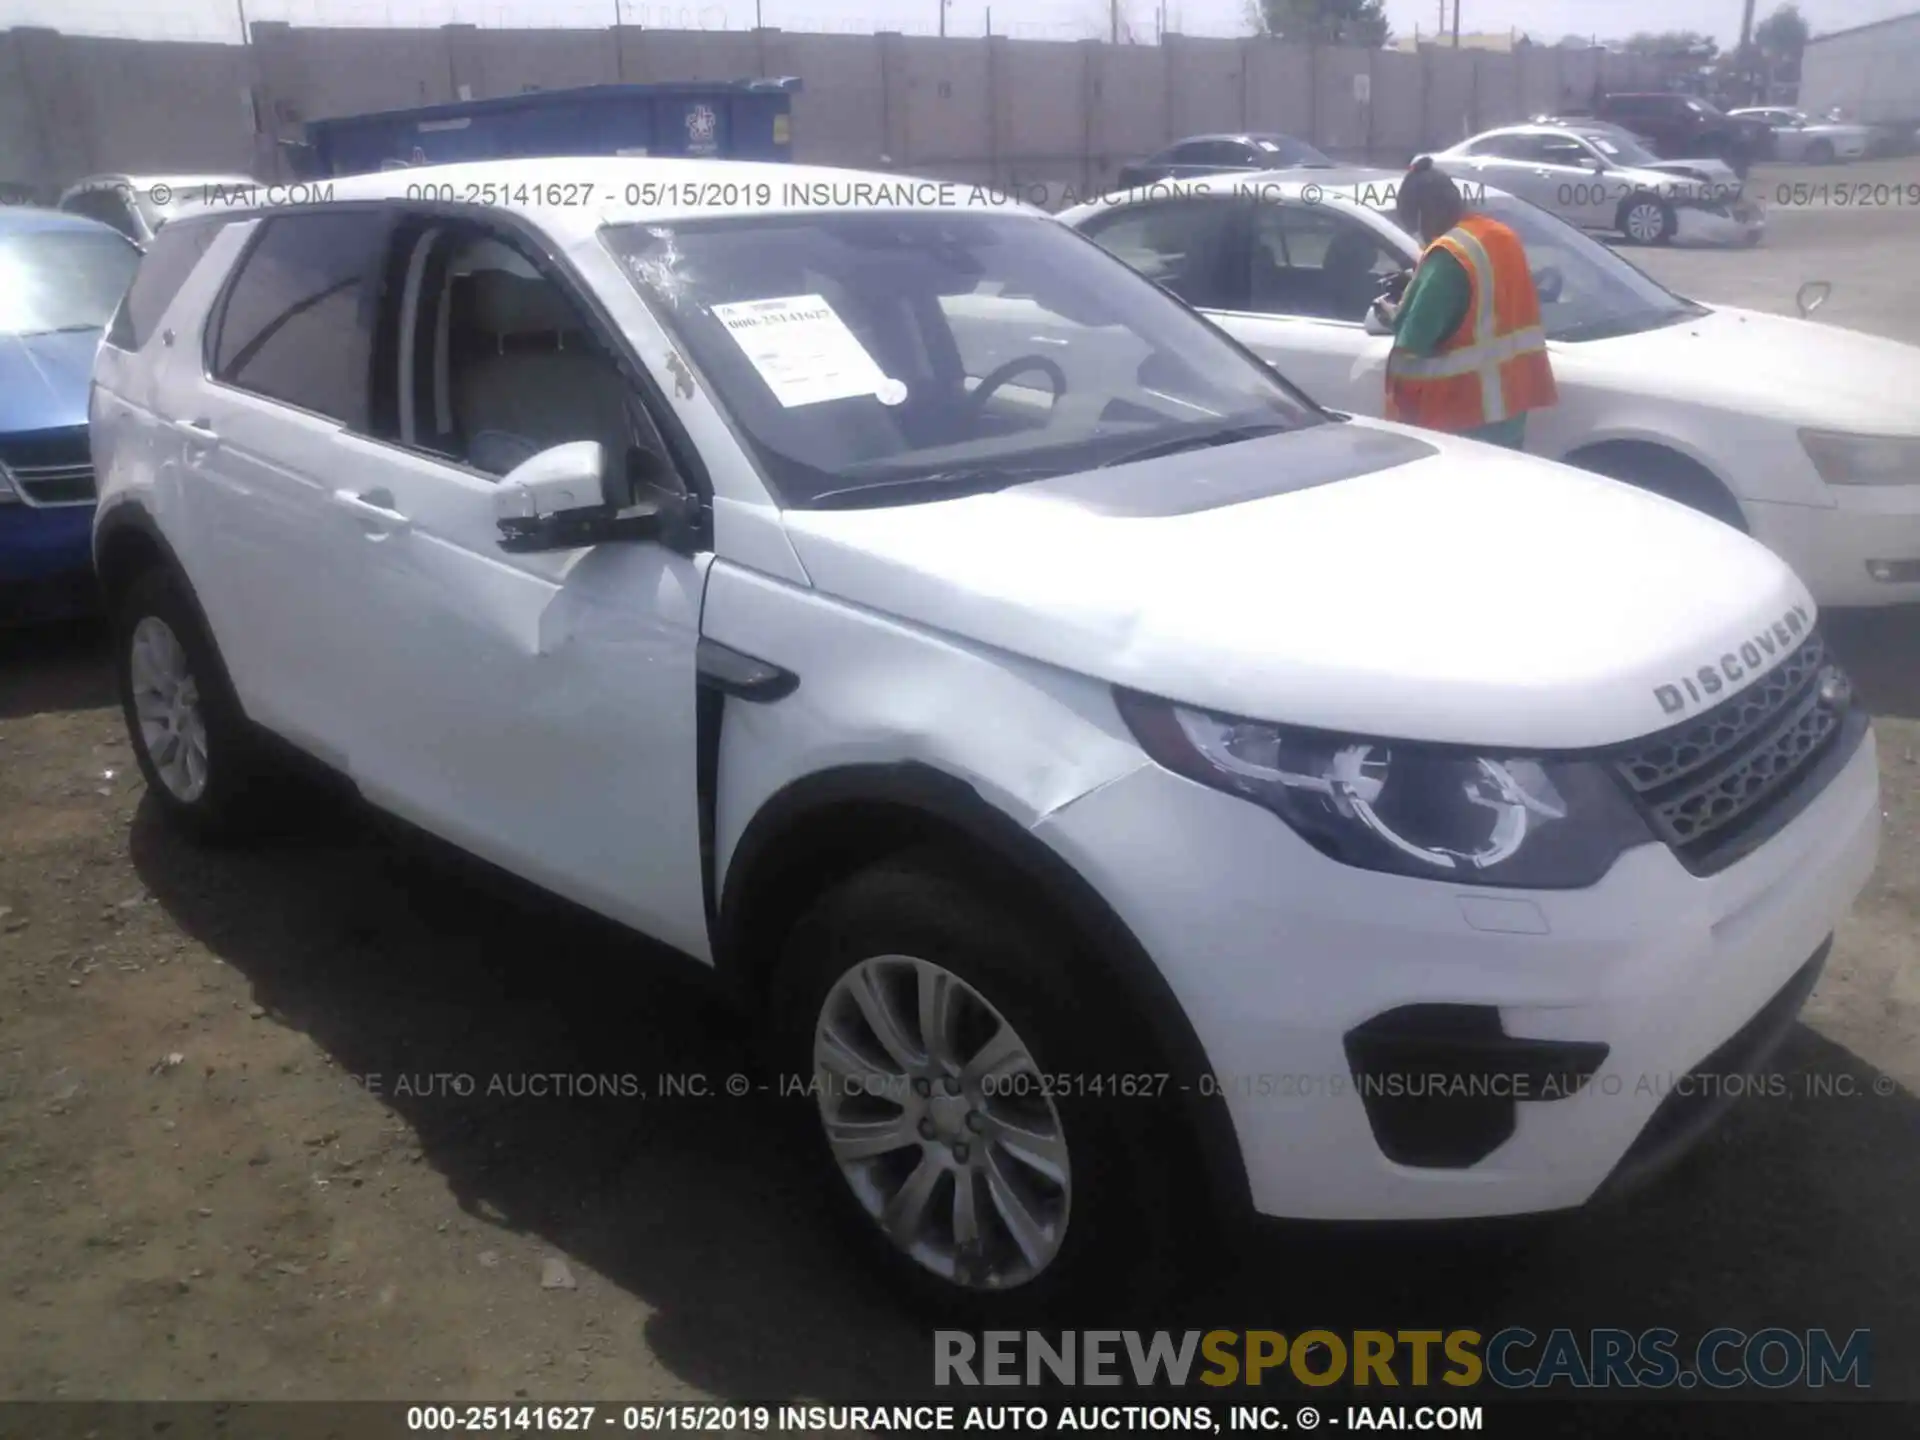 1 Photograph of a damaged car SALCP2FXXKH799937 LAND ROVER DISCOVERY SPORT 2019